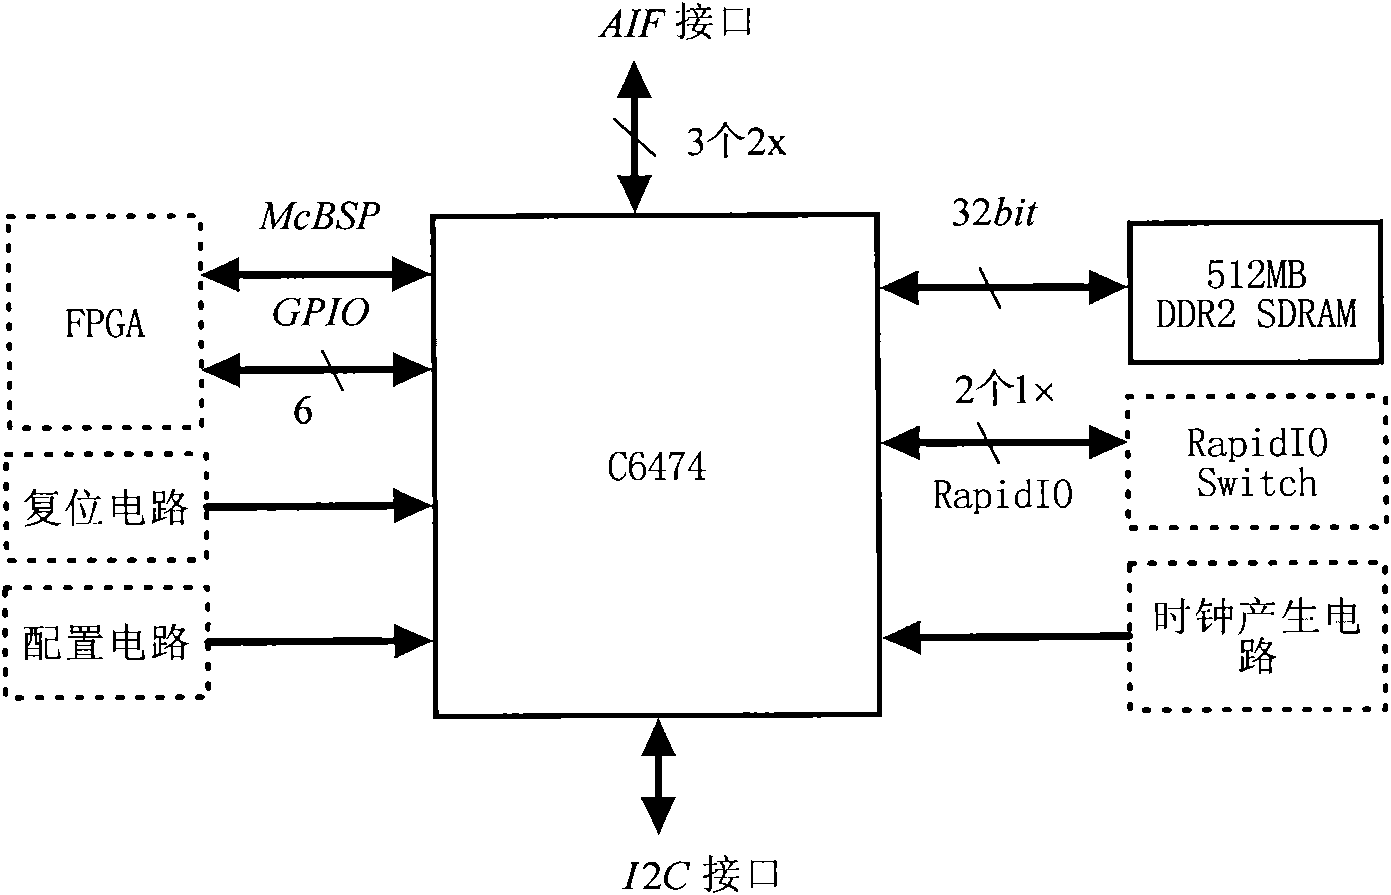 Switchboard based extensible DSPEED-DSP (Digital Signal Processor)_Q6474 signal processing board